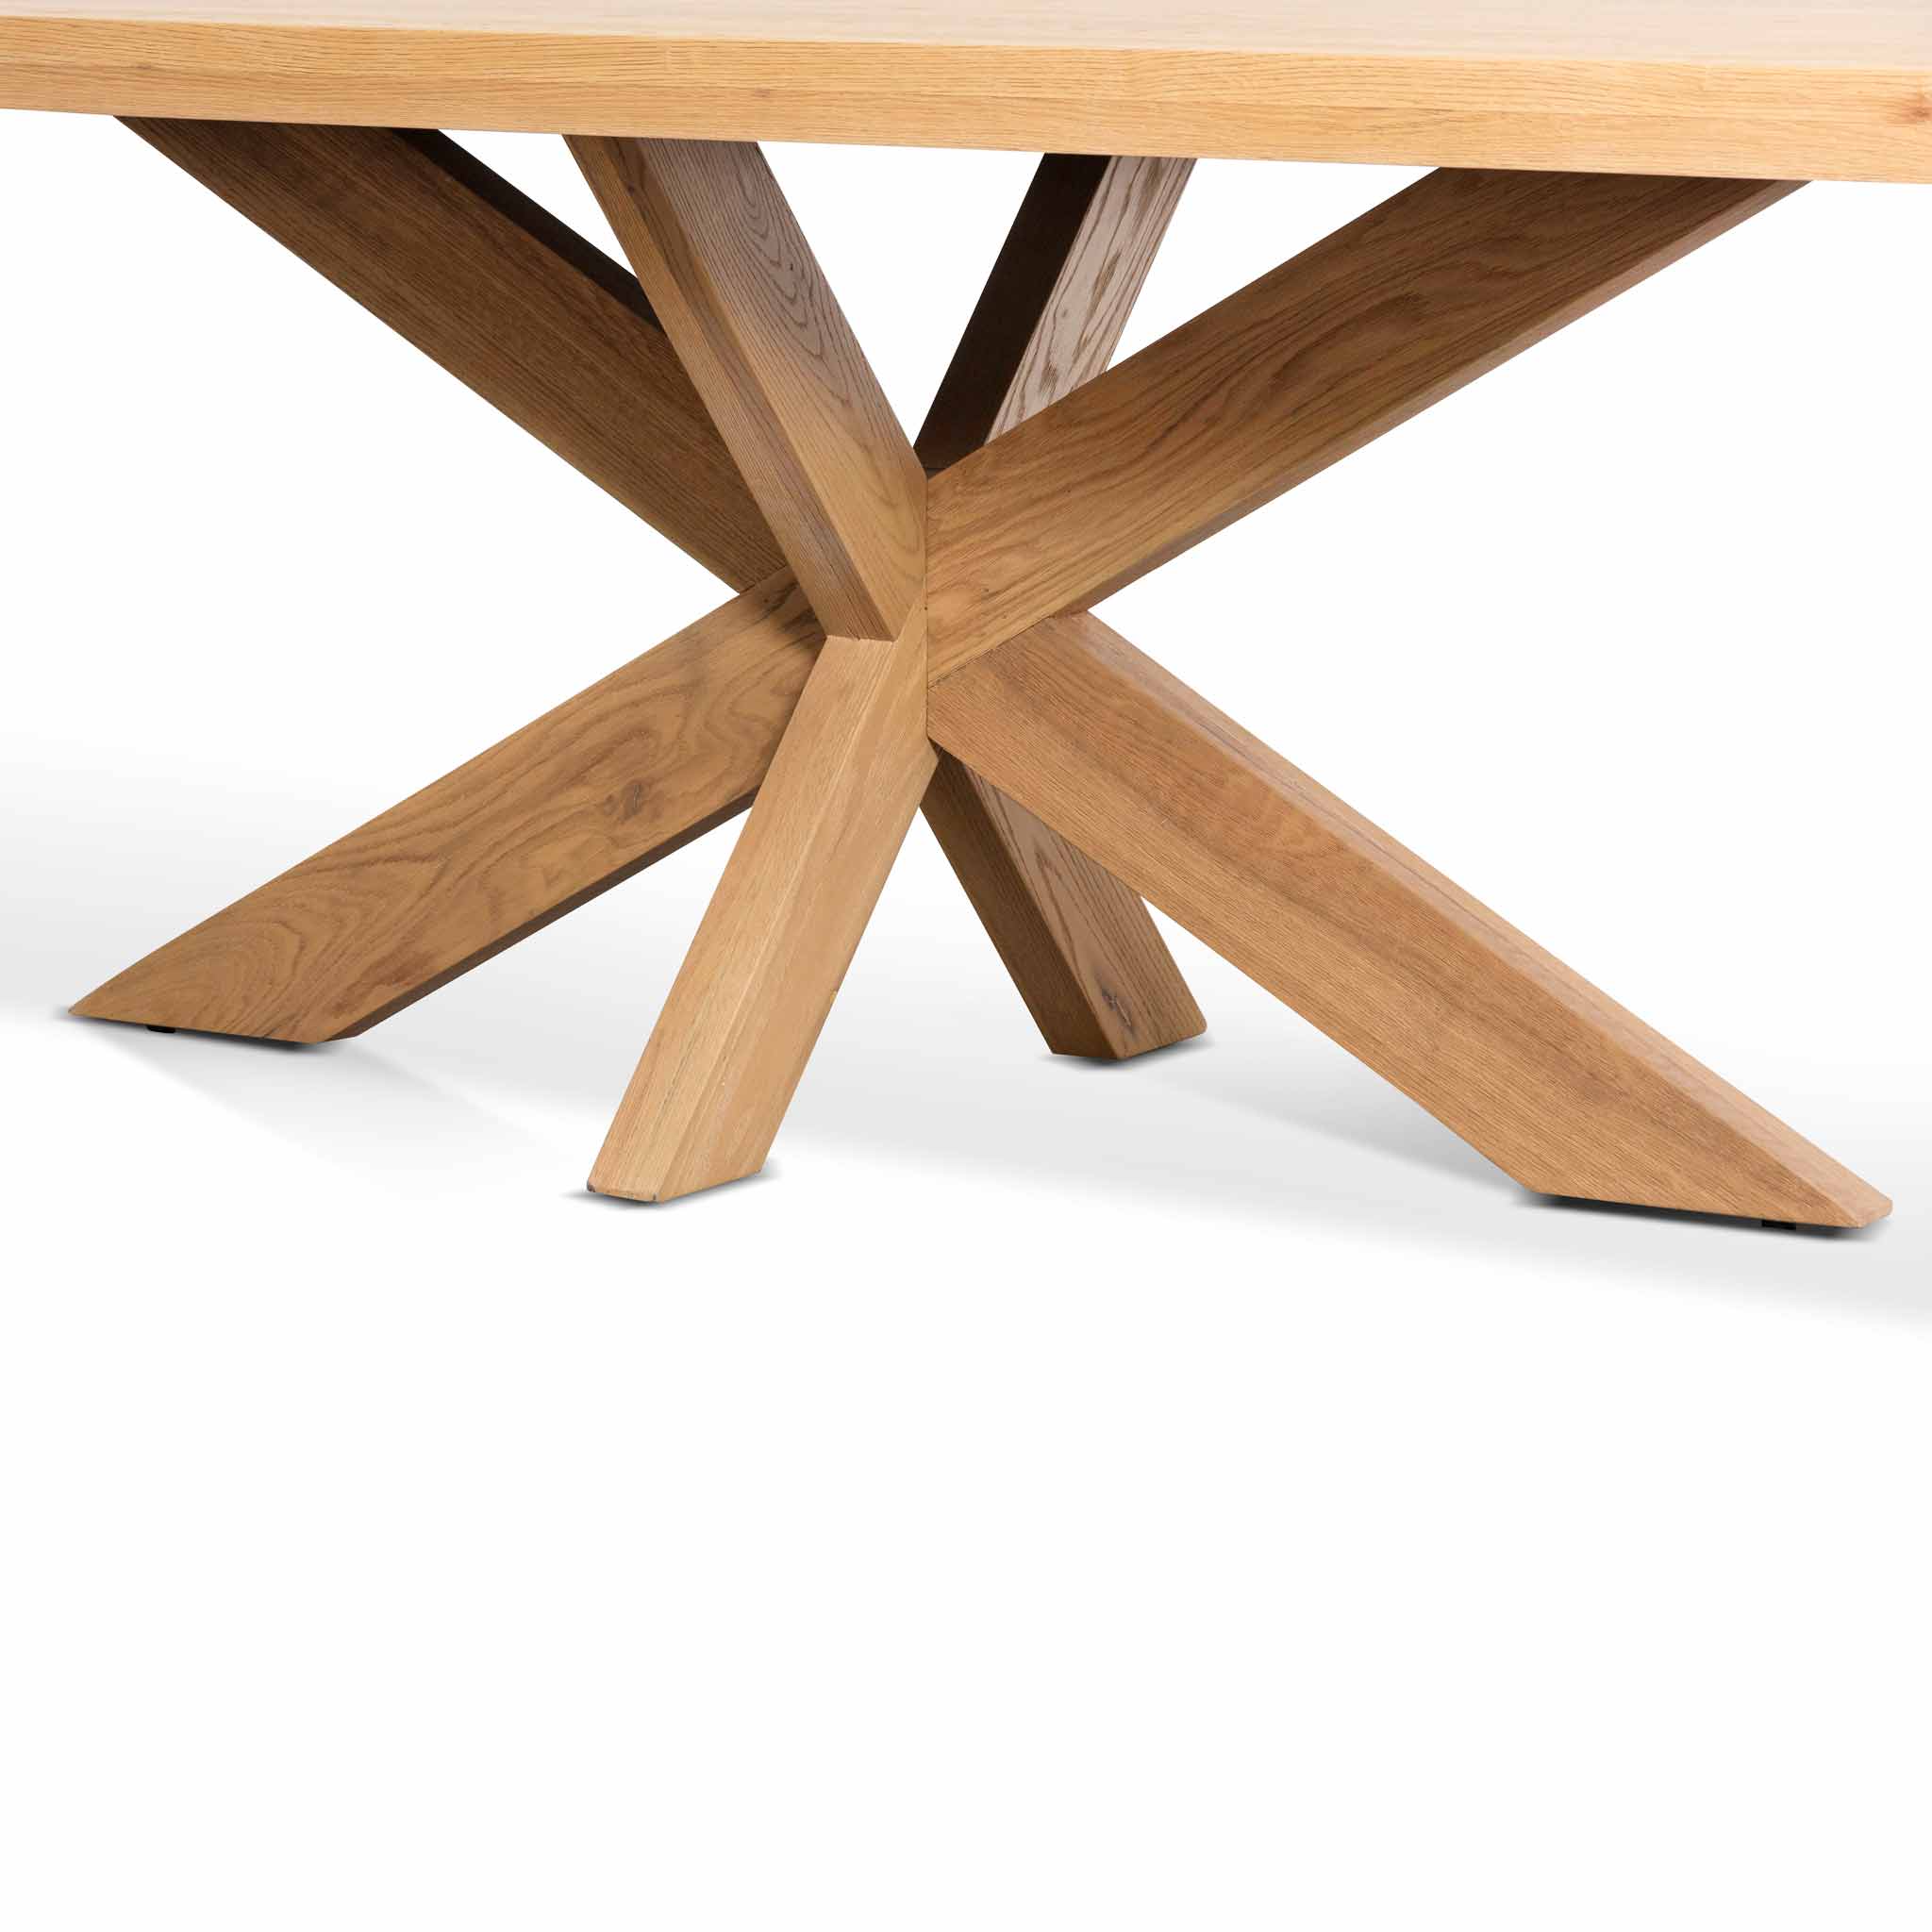 Amazon 2.2m Wooden Dining Table - Distress Natural - Dining Tables